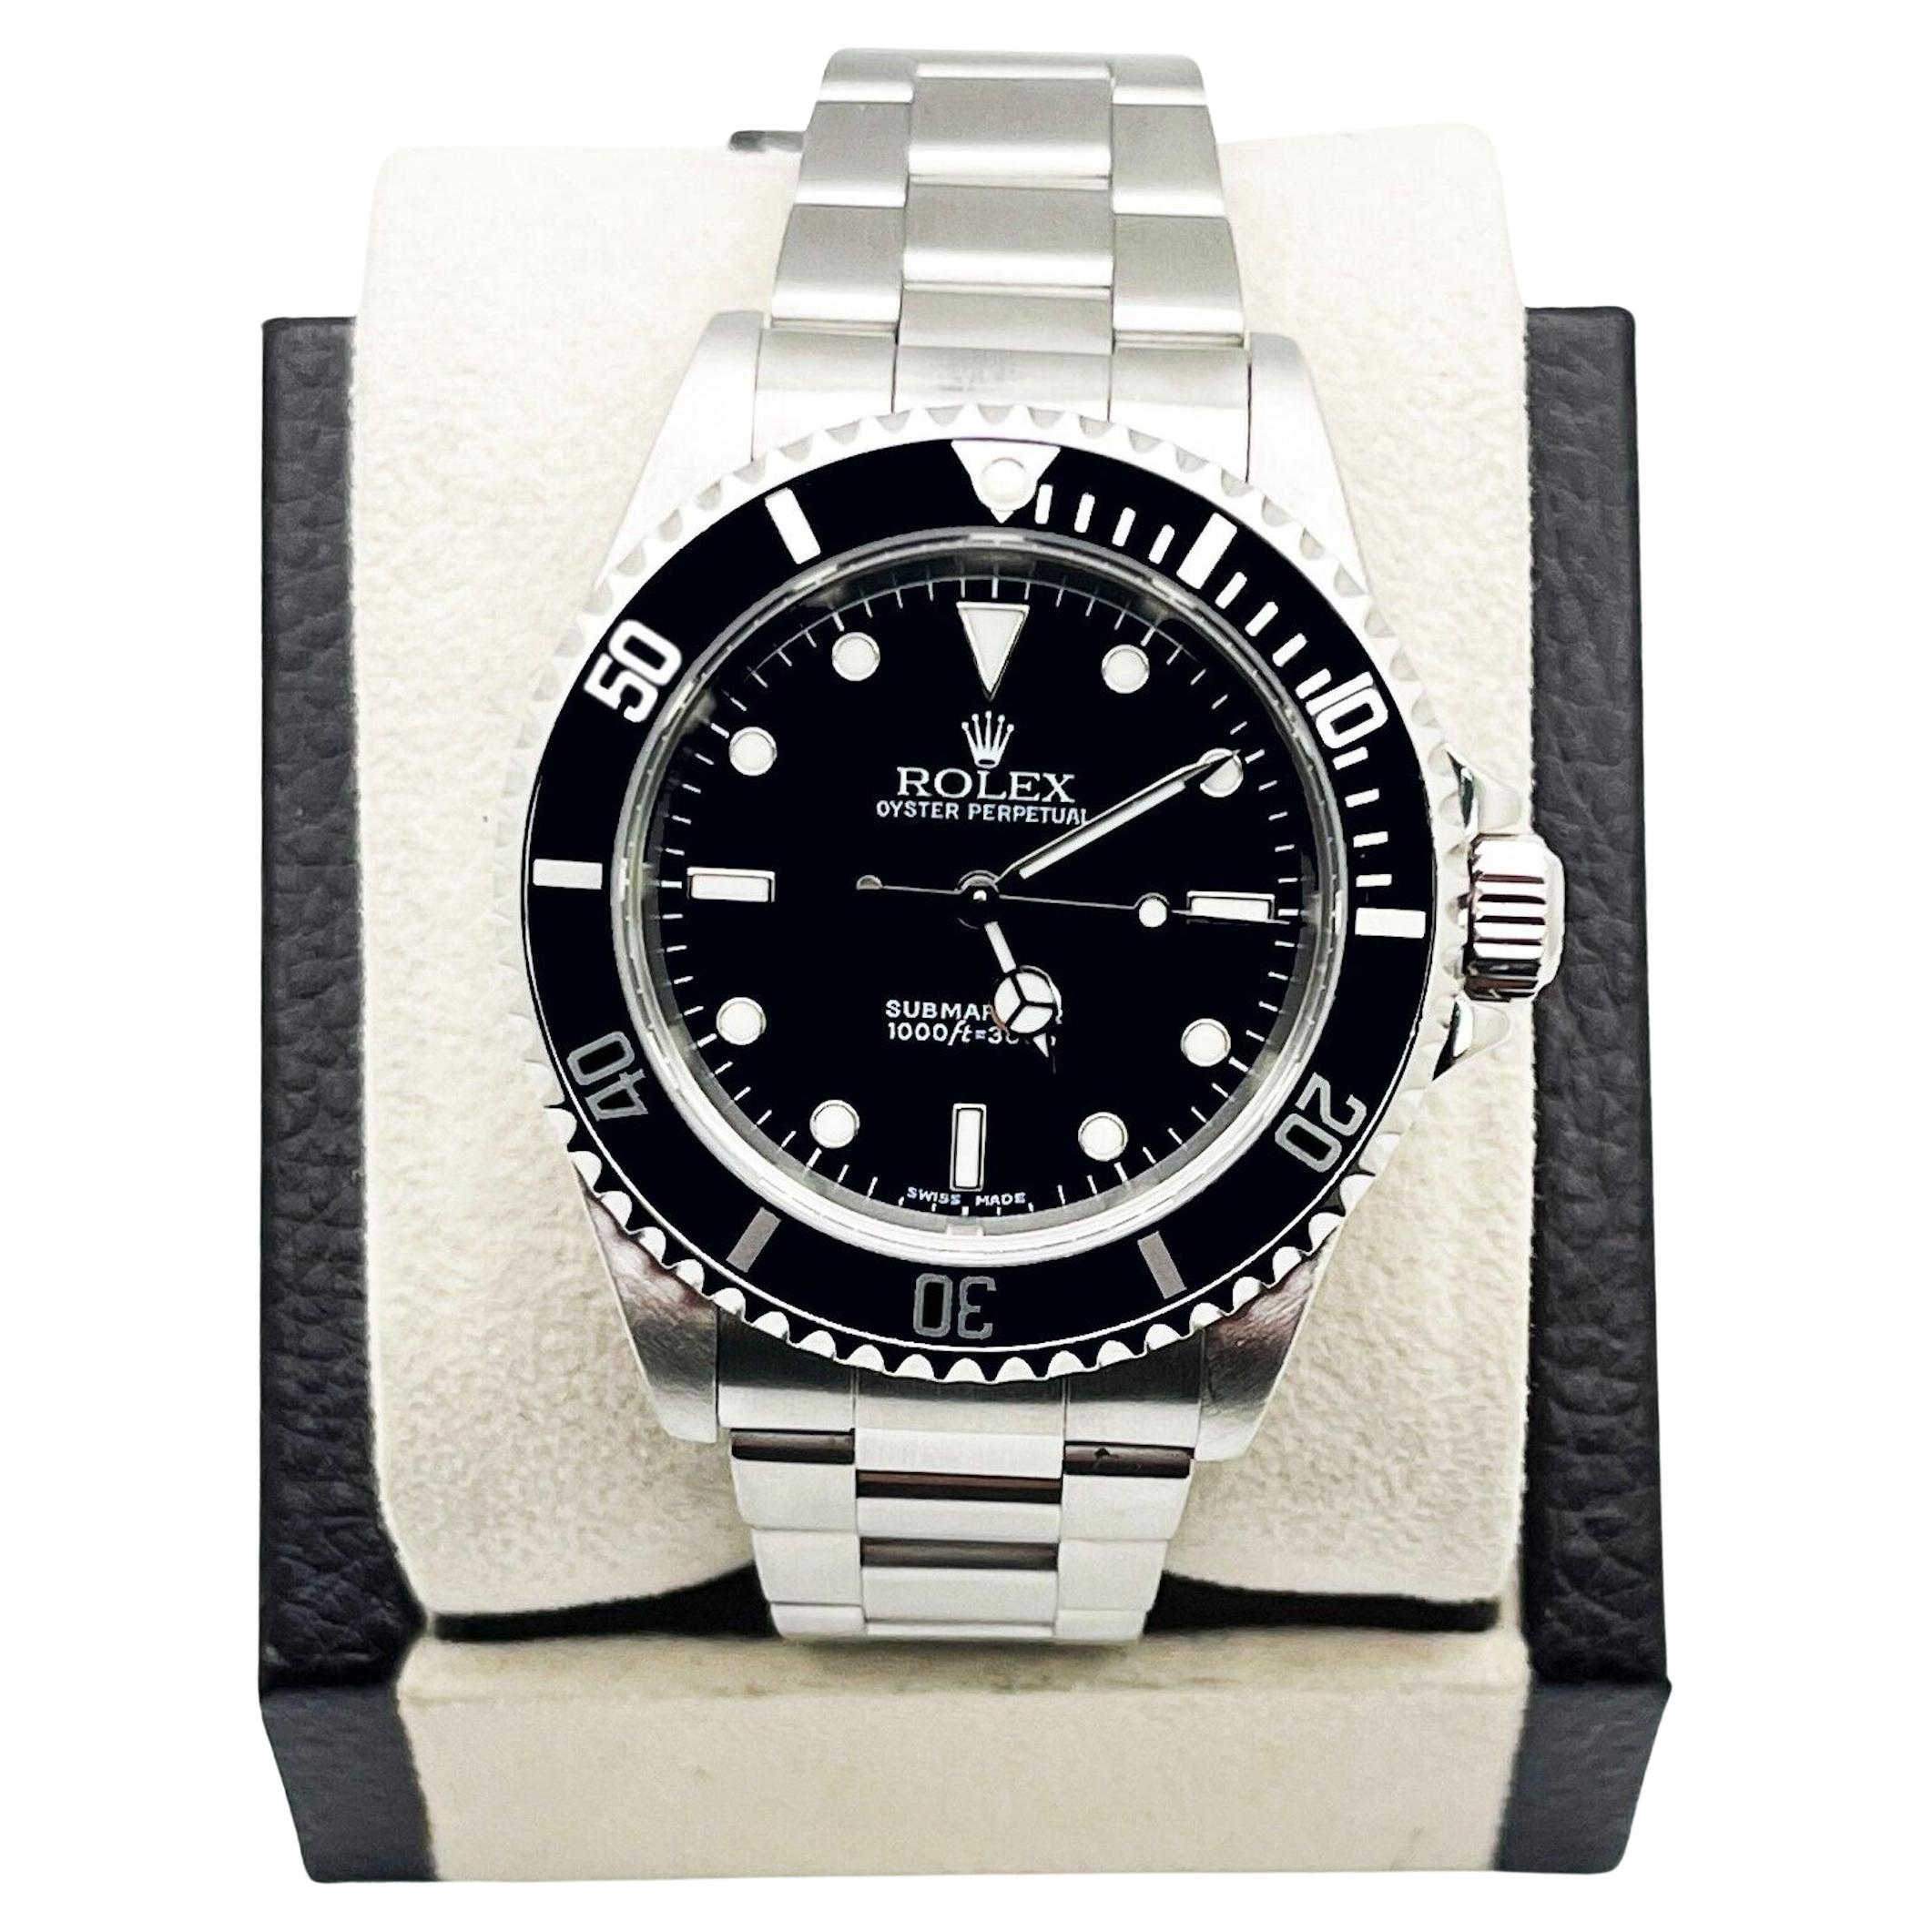 Rolex Submariner 14060 Black Dial Stainless Steel Box Paper 2005